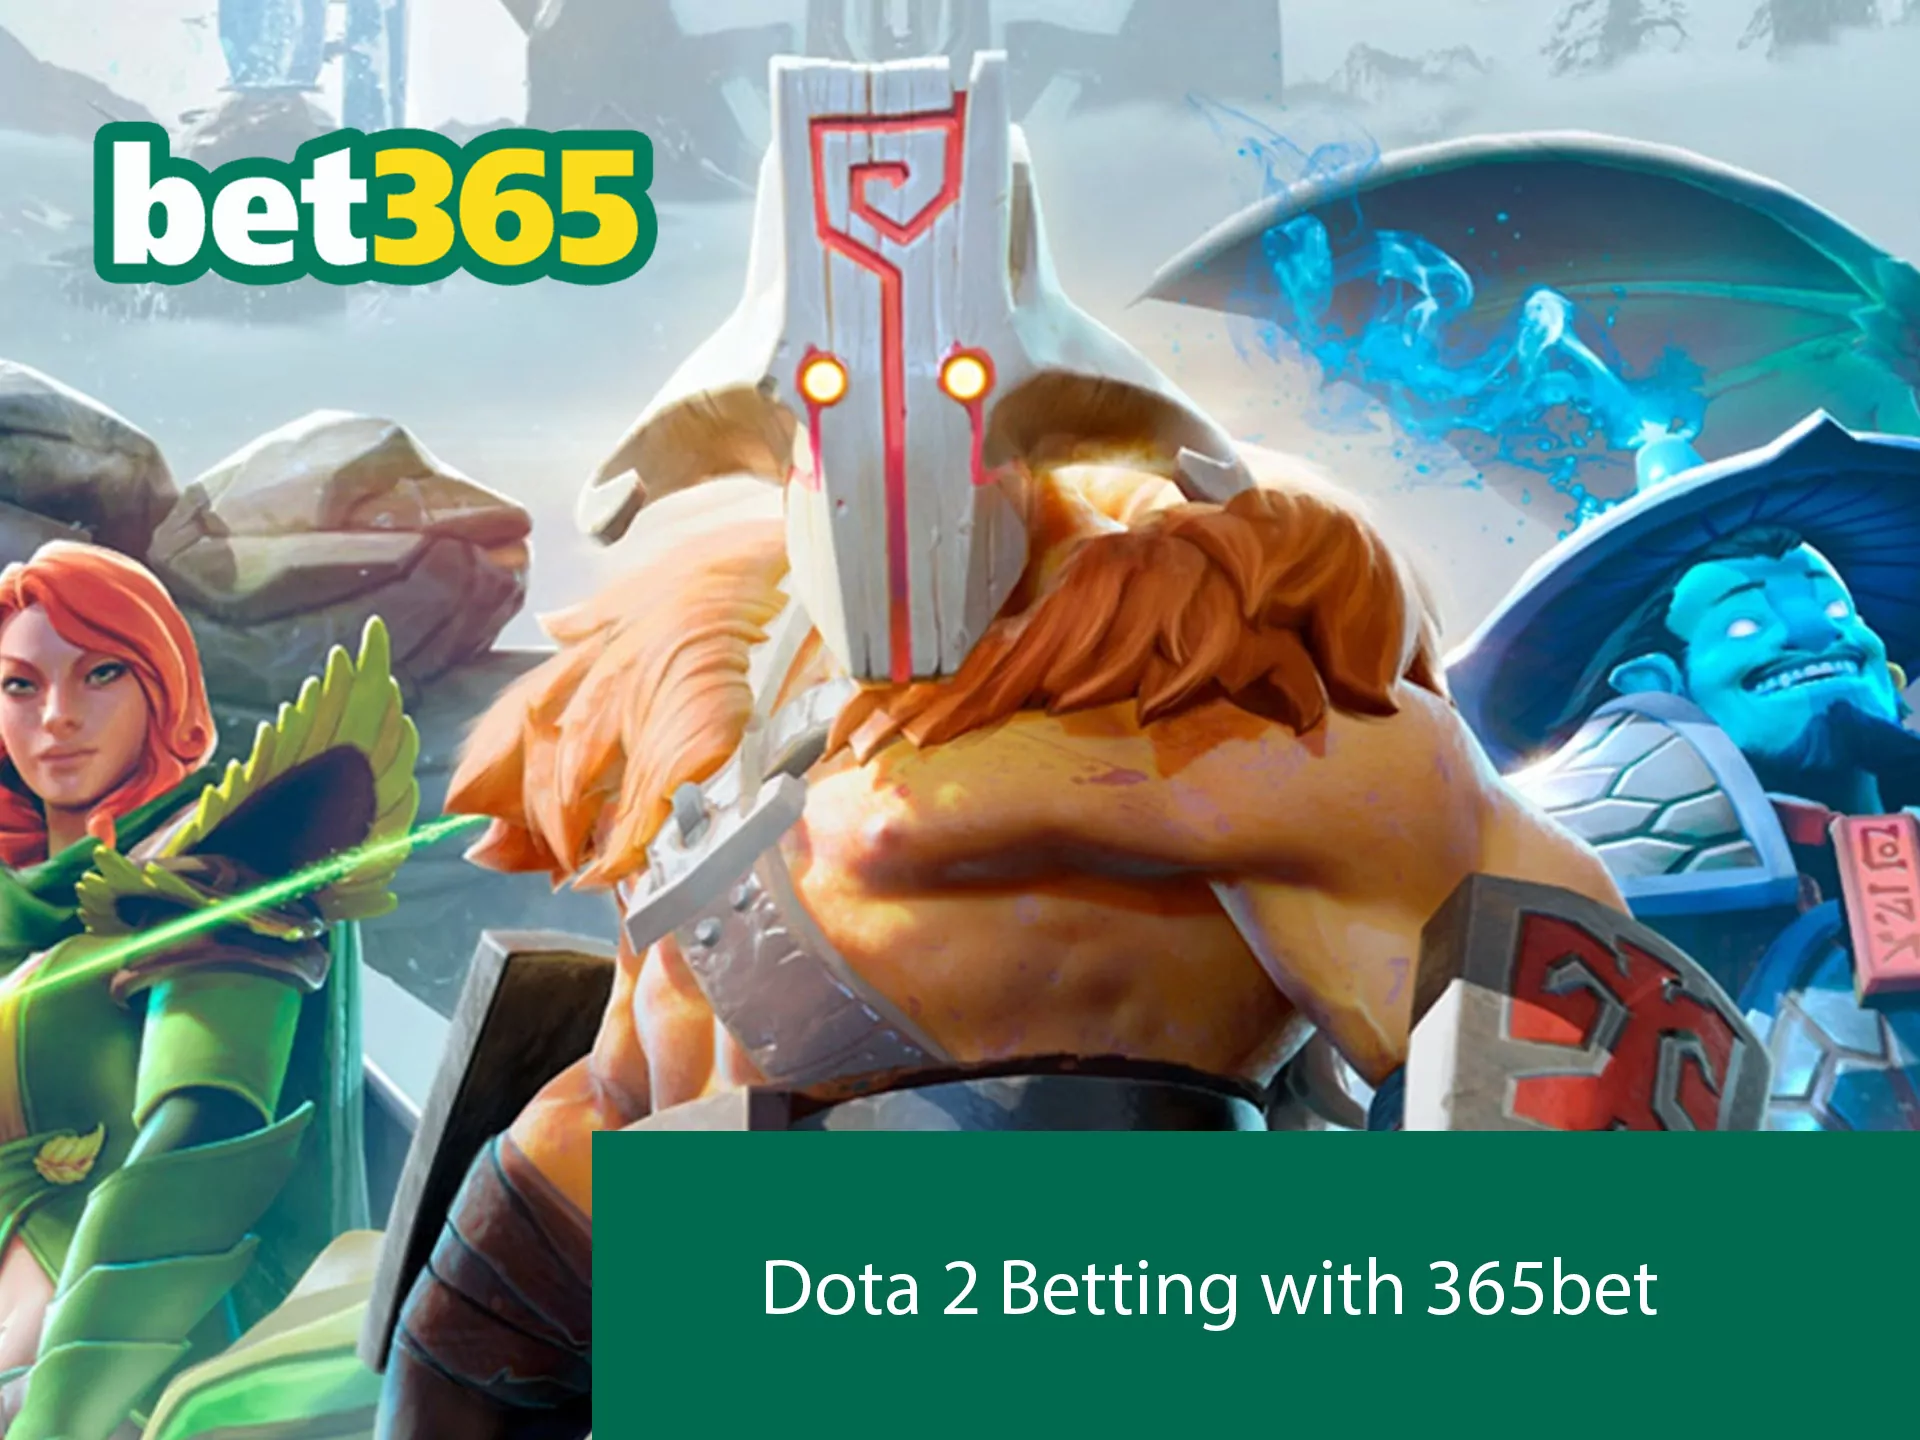 Dota 2 Betting with 365bet has unusual types of betting beyond the basics.